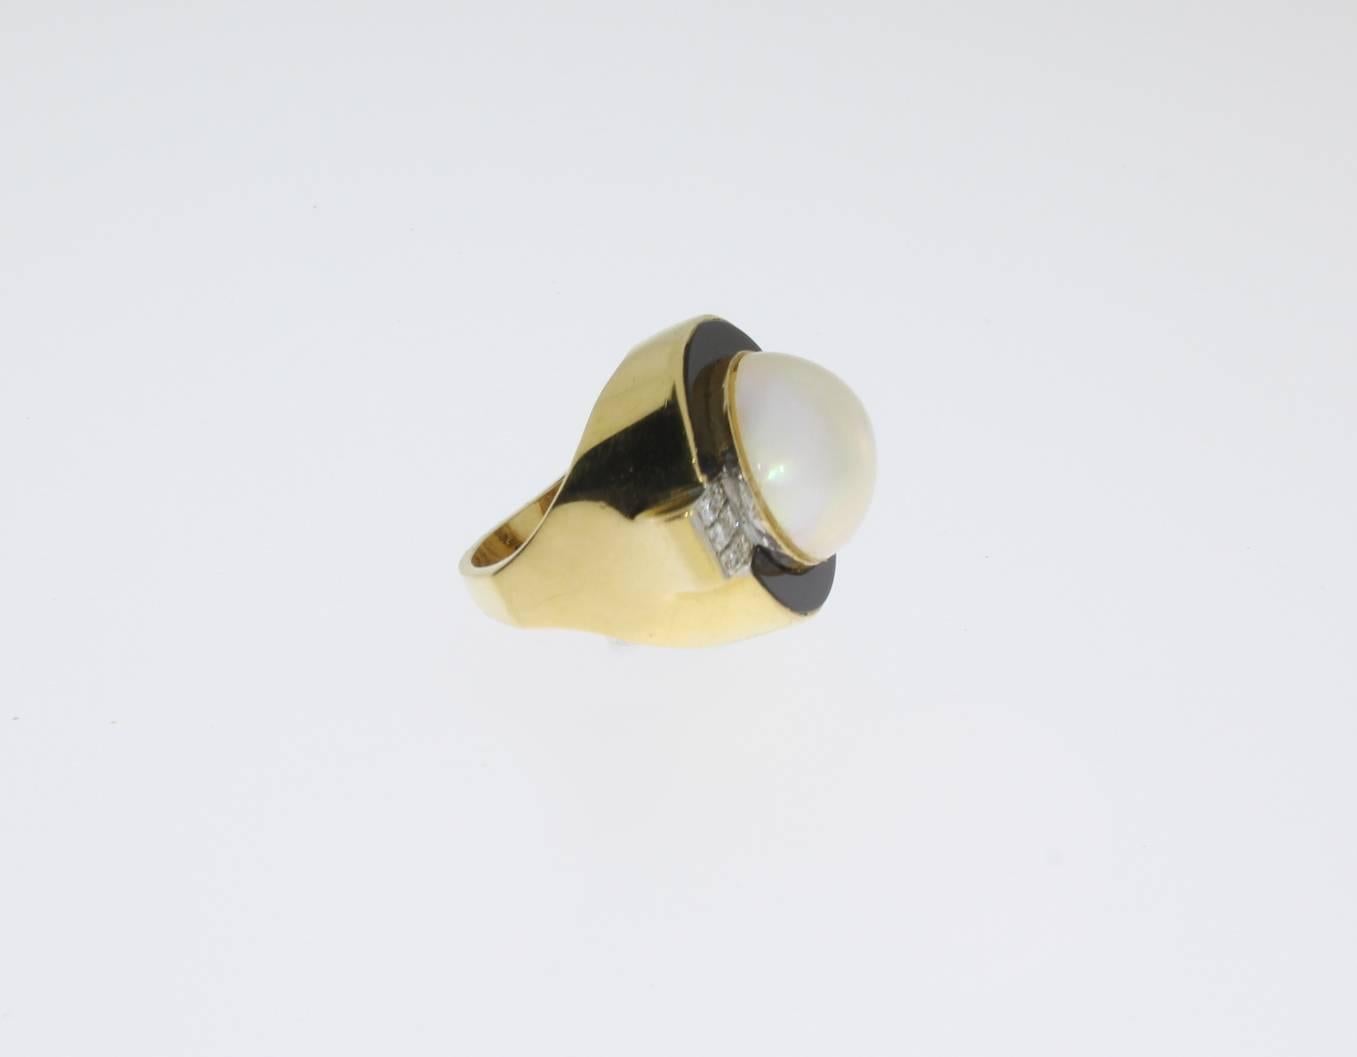 The ring is crafted in 14K yellow gold. A large mabé pearl is captured within an round setting that is further provided with an onyx and 12 brilliant-cut diamonds weighing ca. 0,24 ct. Marked on the ring band with the purity 14K. Total weight: